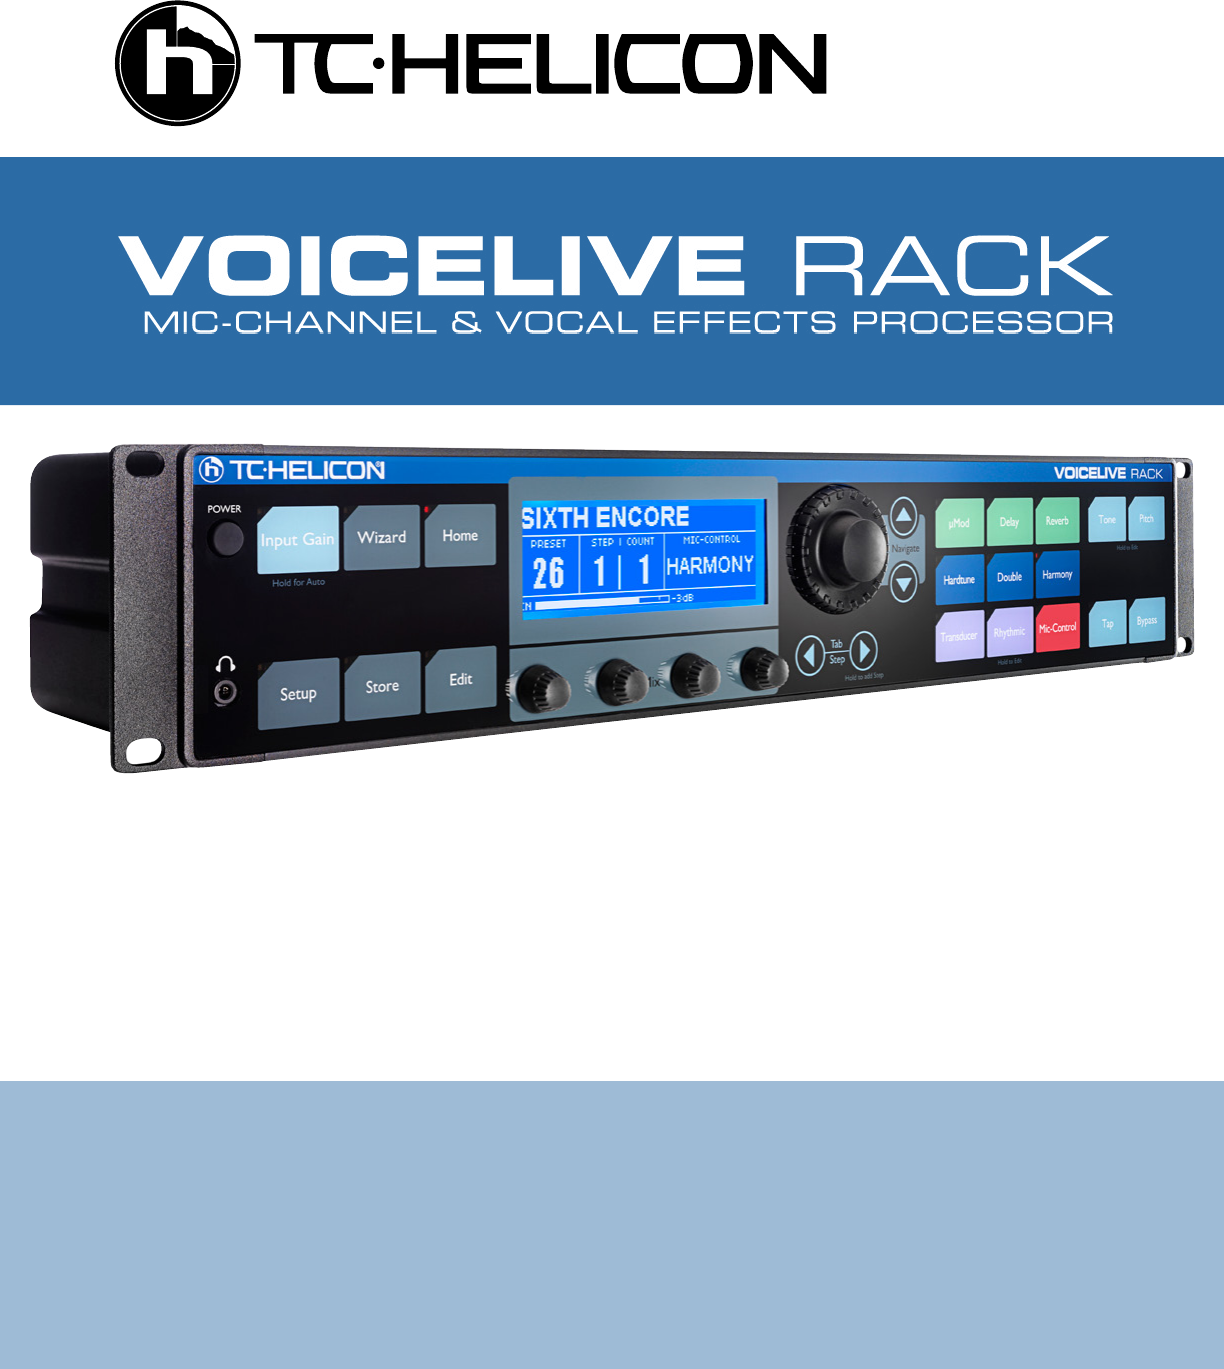 Manual Tc Helicon Voicelive Rack Page 1 Of English